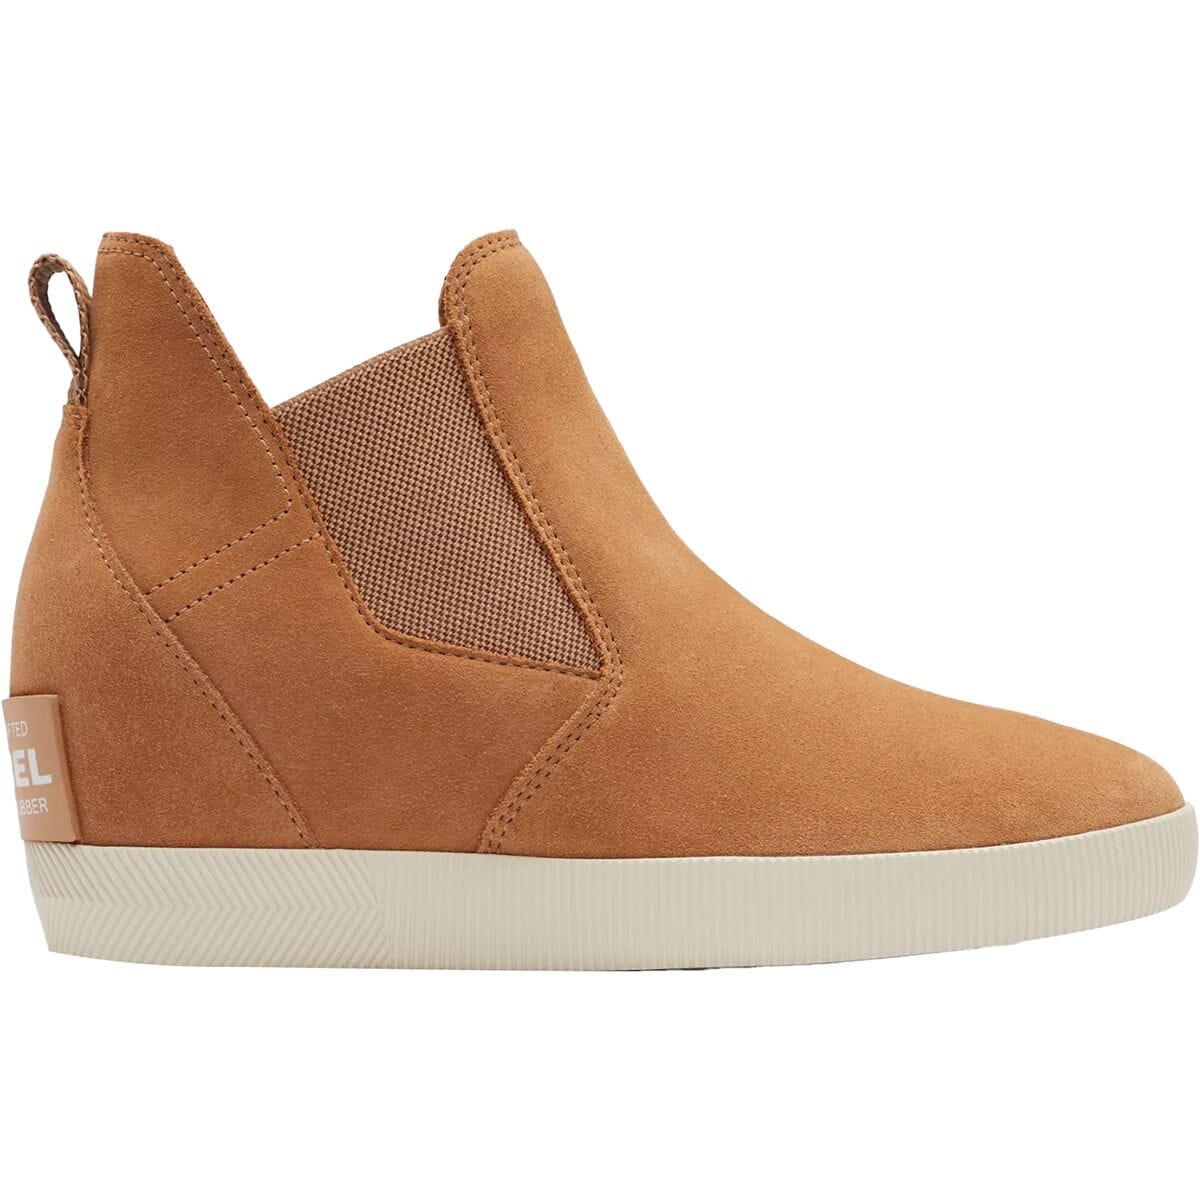 Out N About Slip-On Wedge II Boot - Women